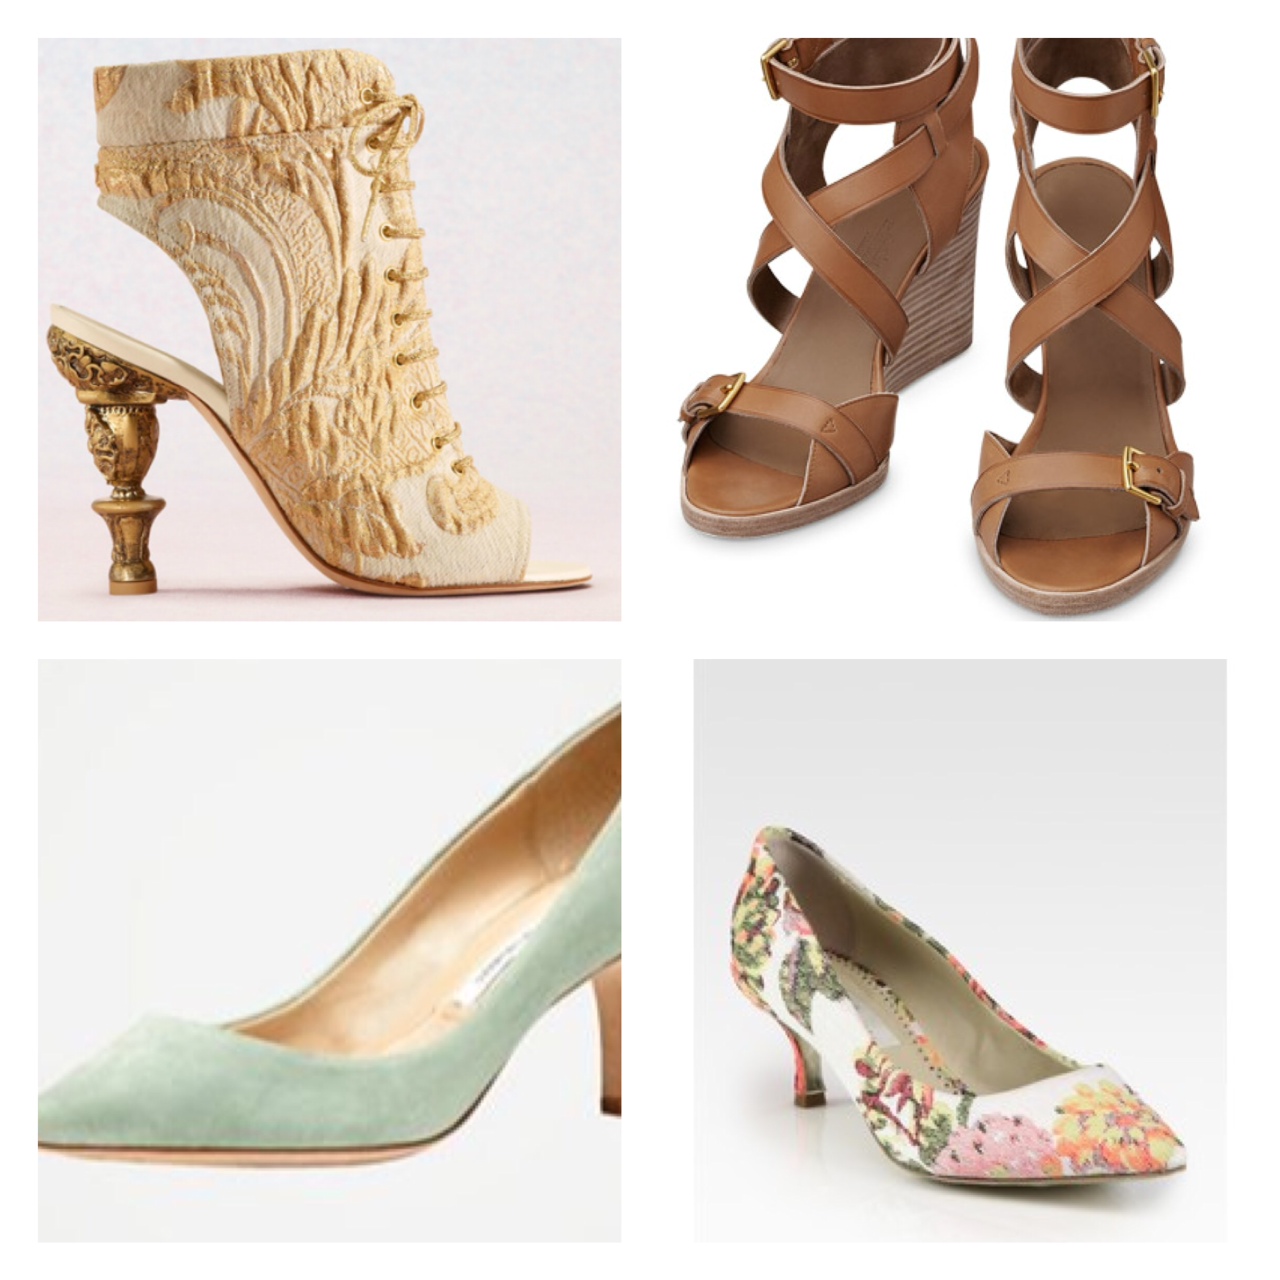 Shoe Shopping - Bold, Bright, and Pretty Pastels